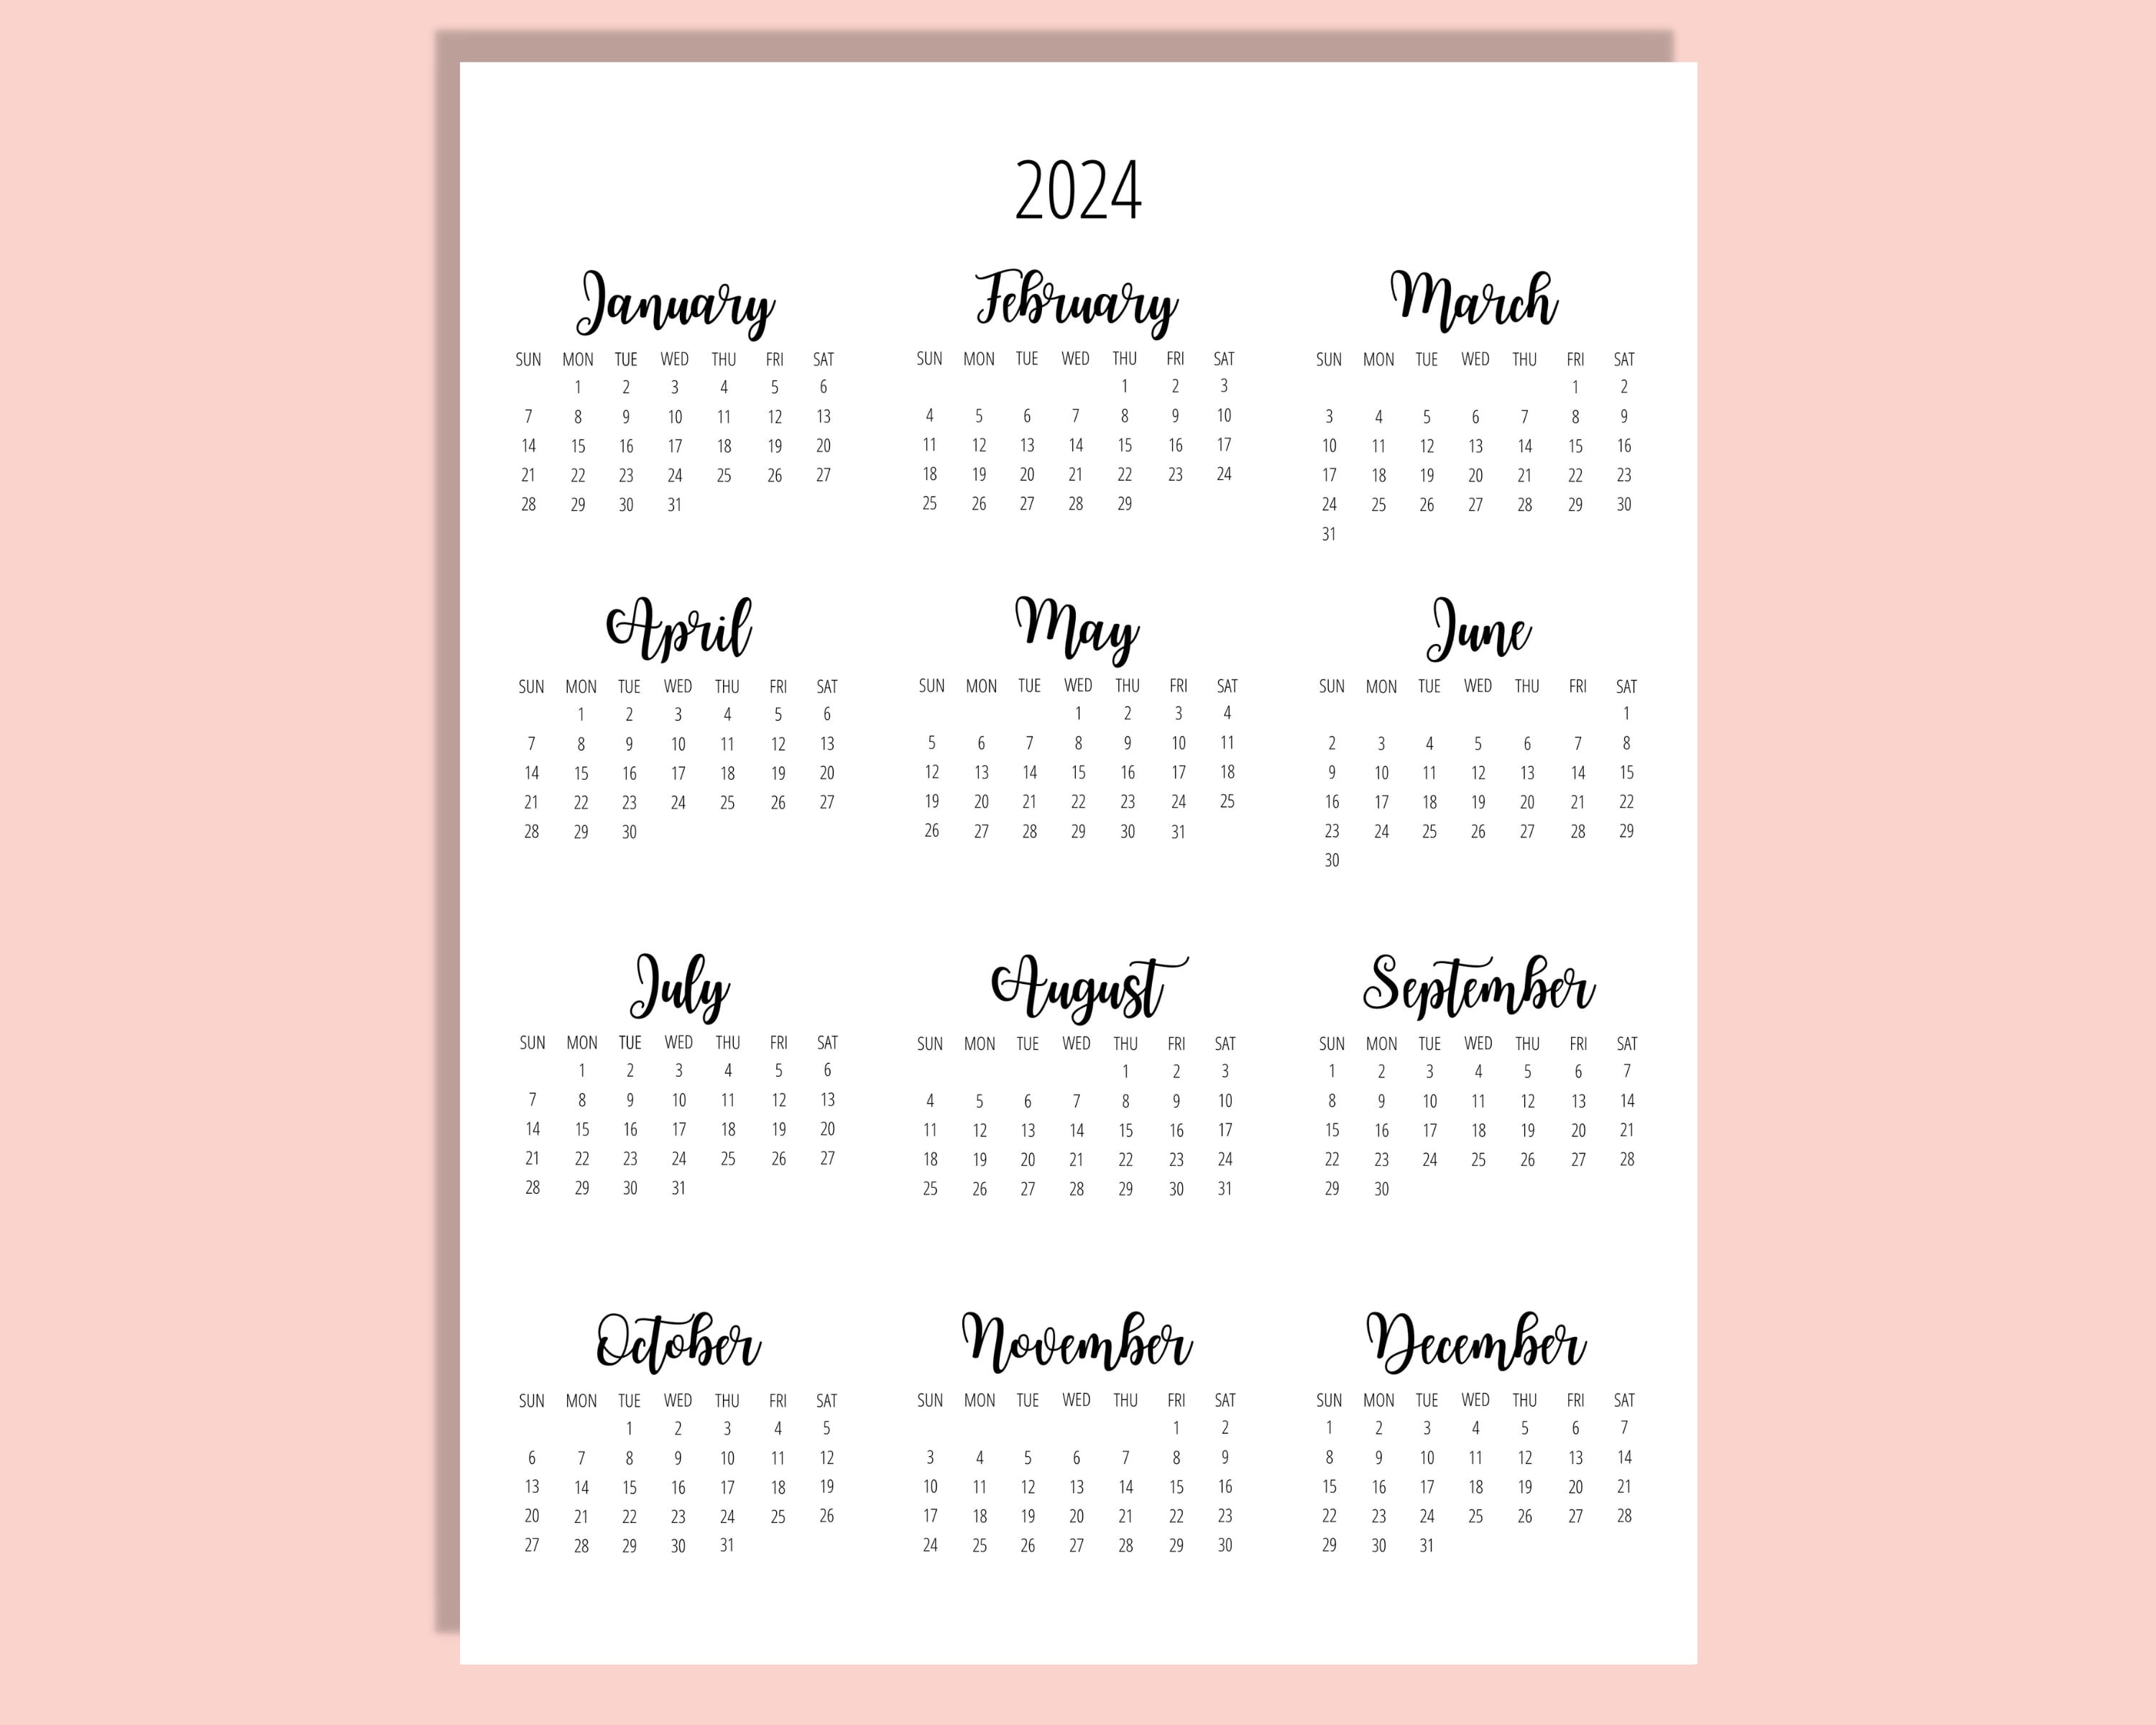 2024 Calendar Template 8.5 X 11 Inches Vertical Year at A Etsy UK